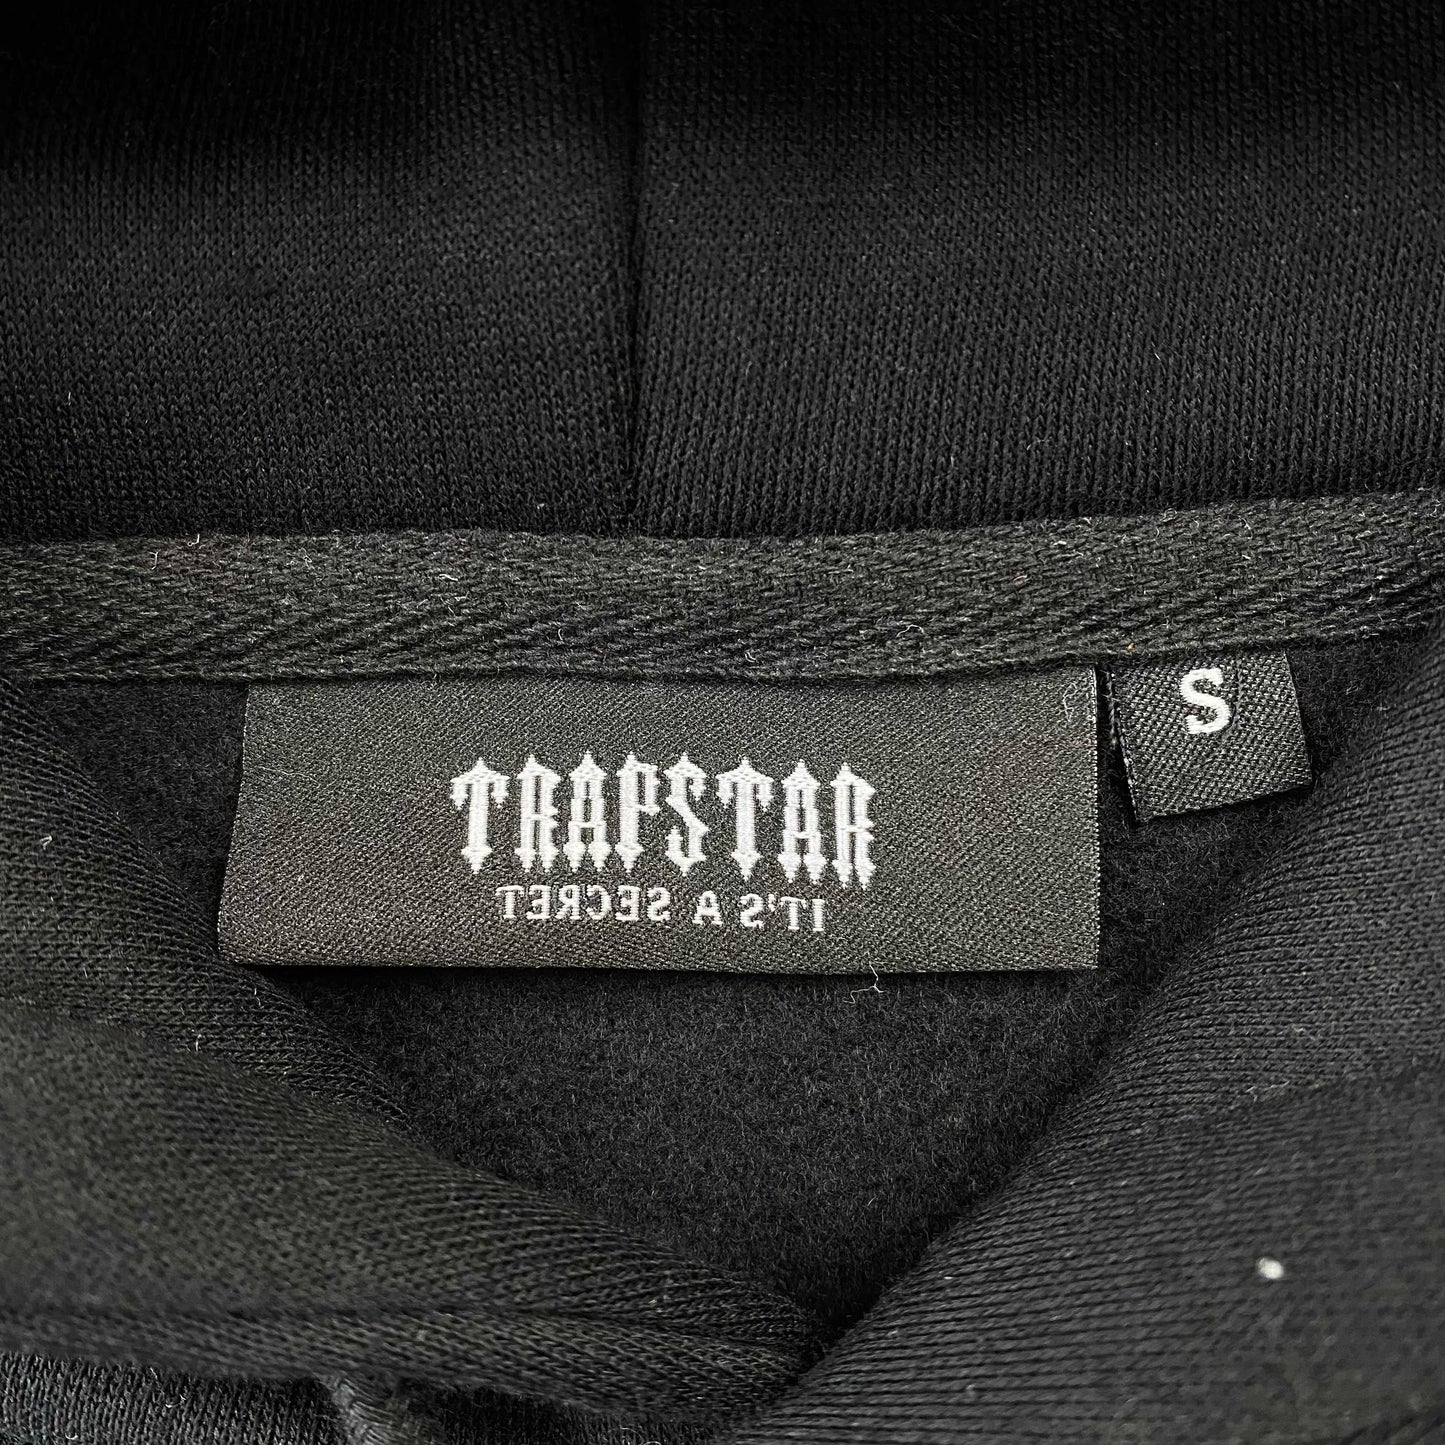 Trapstar Fuzzy Logo Hoodie and Pants Tracksuits